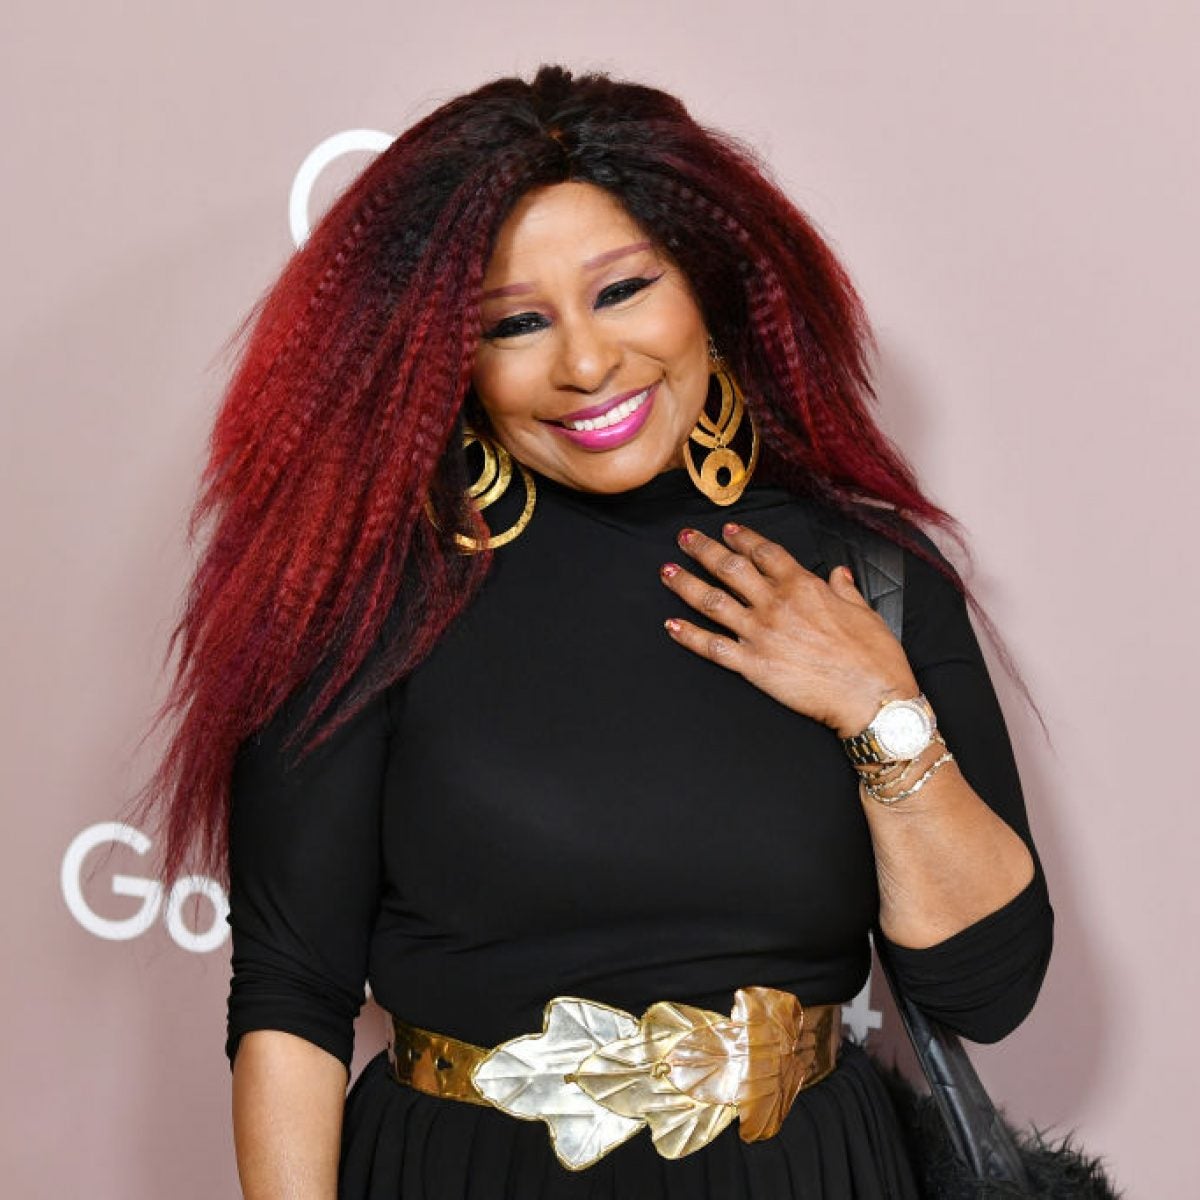 This Is The One Singer Chaka Khan Would Do A Verzuz Battle With